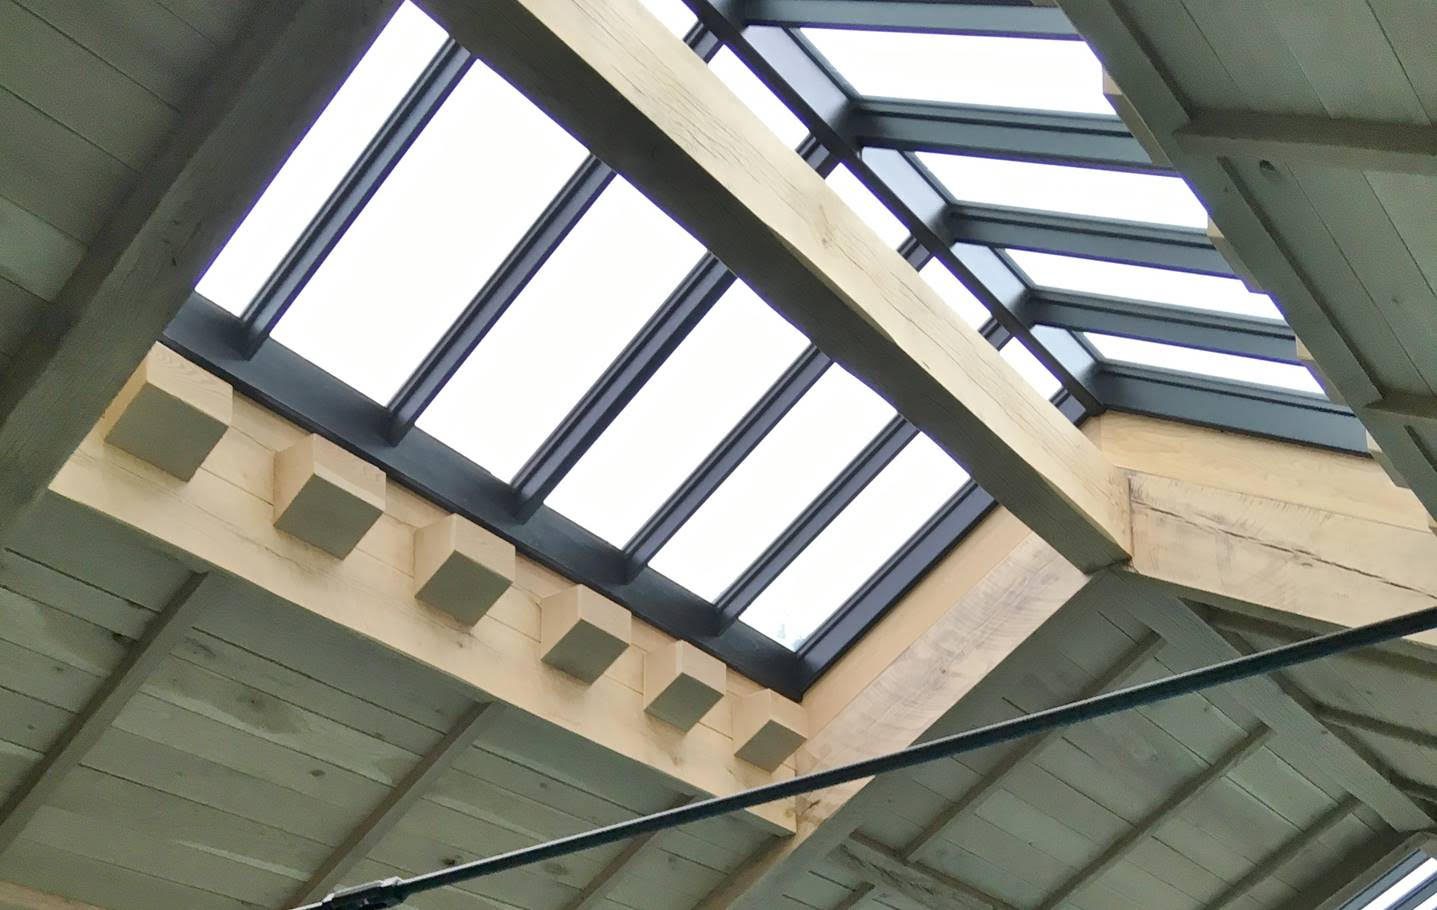 A skylight that is being installed in the ceiling.